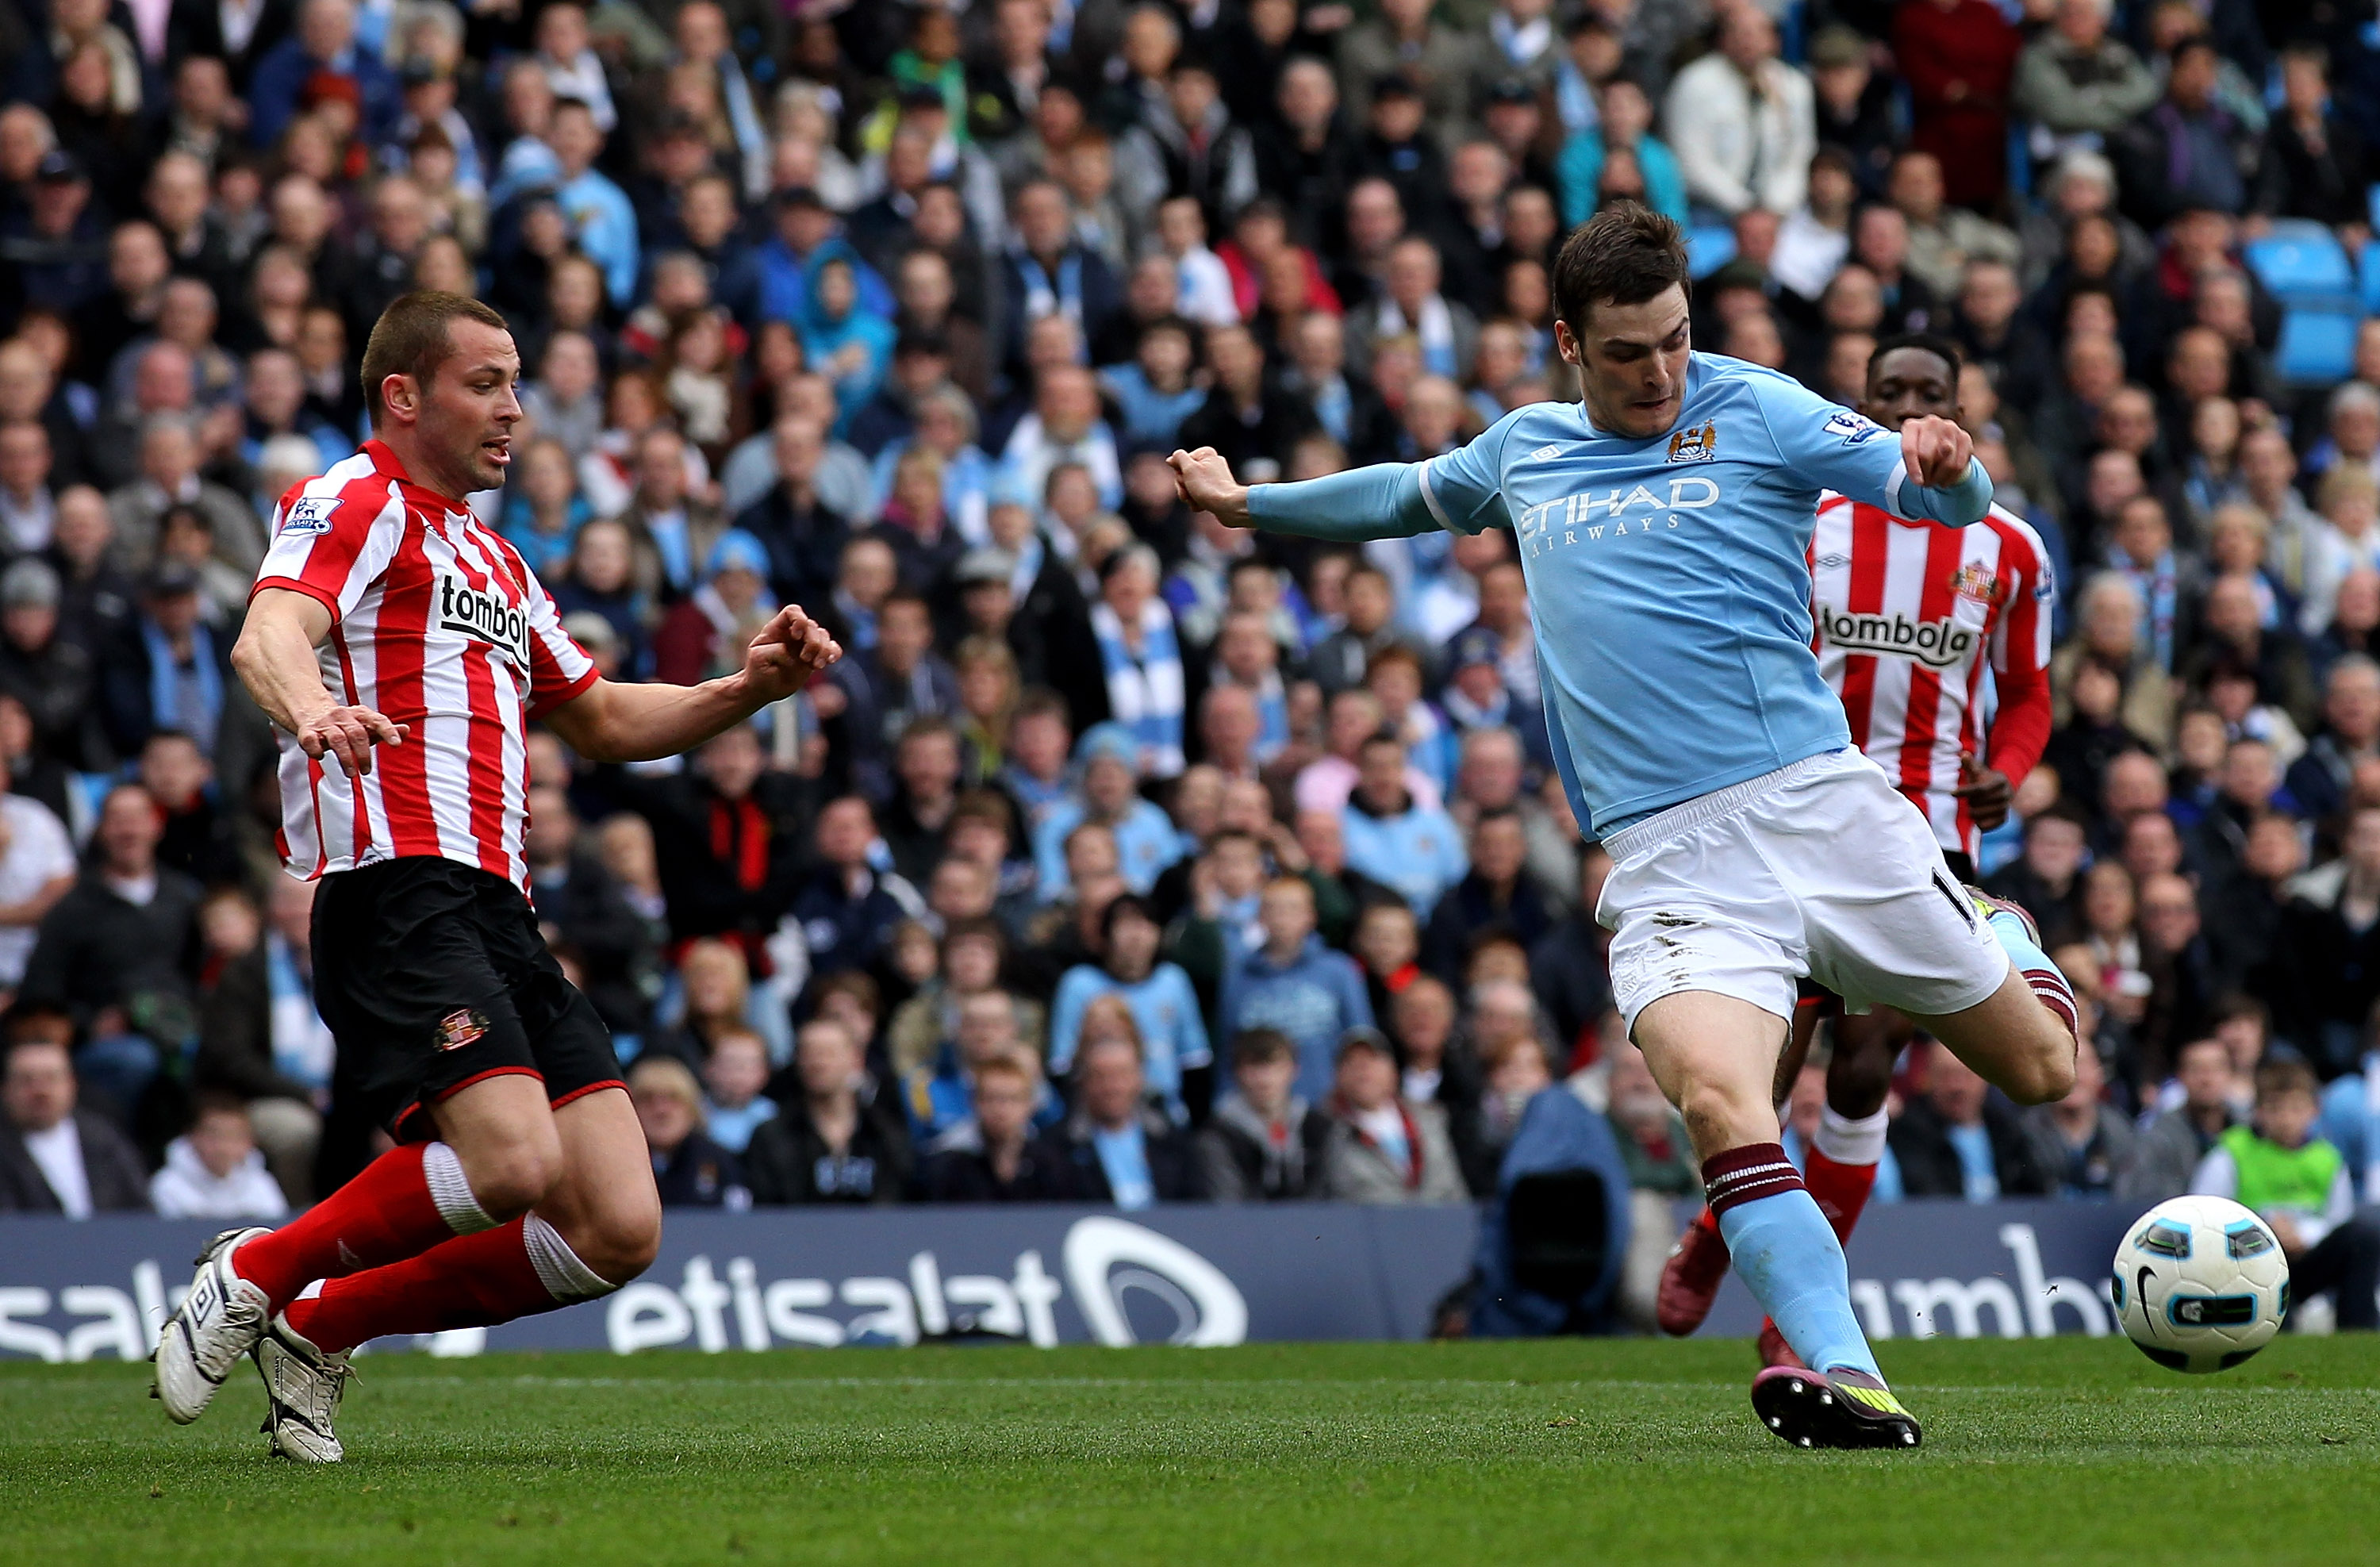 MANCHESTER, ENGLAND - APRIL 03:  Adam Johnson of Manchester City scores the opening goal during the Barclays Premier League match between Manchester City and Sunderland at the City of Manchester Stadium on April 3, 2011 in Manchester, England.  (Photo by 